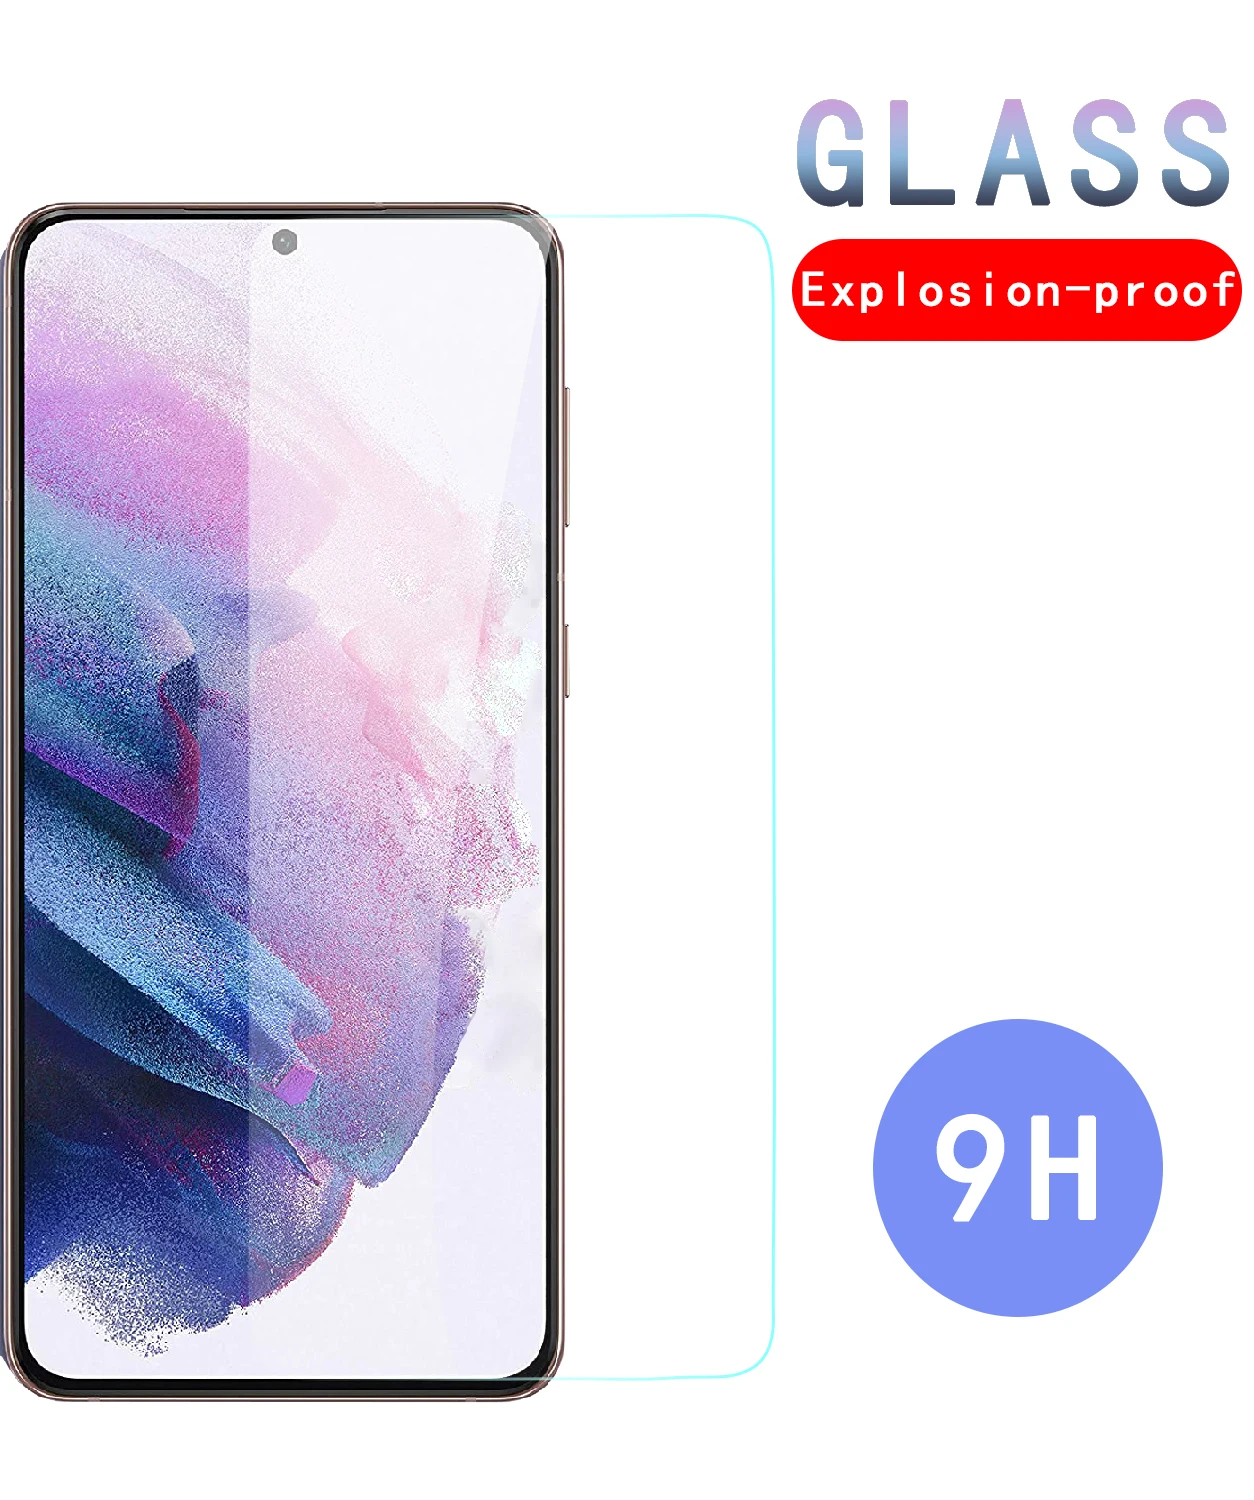 9H Protective Glass For Samsung Galaxy A71 A51 A41 A31 A21S A11 A01 Screen Protector M01 M11 M21 M31 M51 A30 A50 Safety Glass fine line harry styles glass case for samsung galaxy a70 a50 a51 m51 a20 a10 a11 a31 a71 m31 m21 m11 tempered phone covers